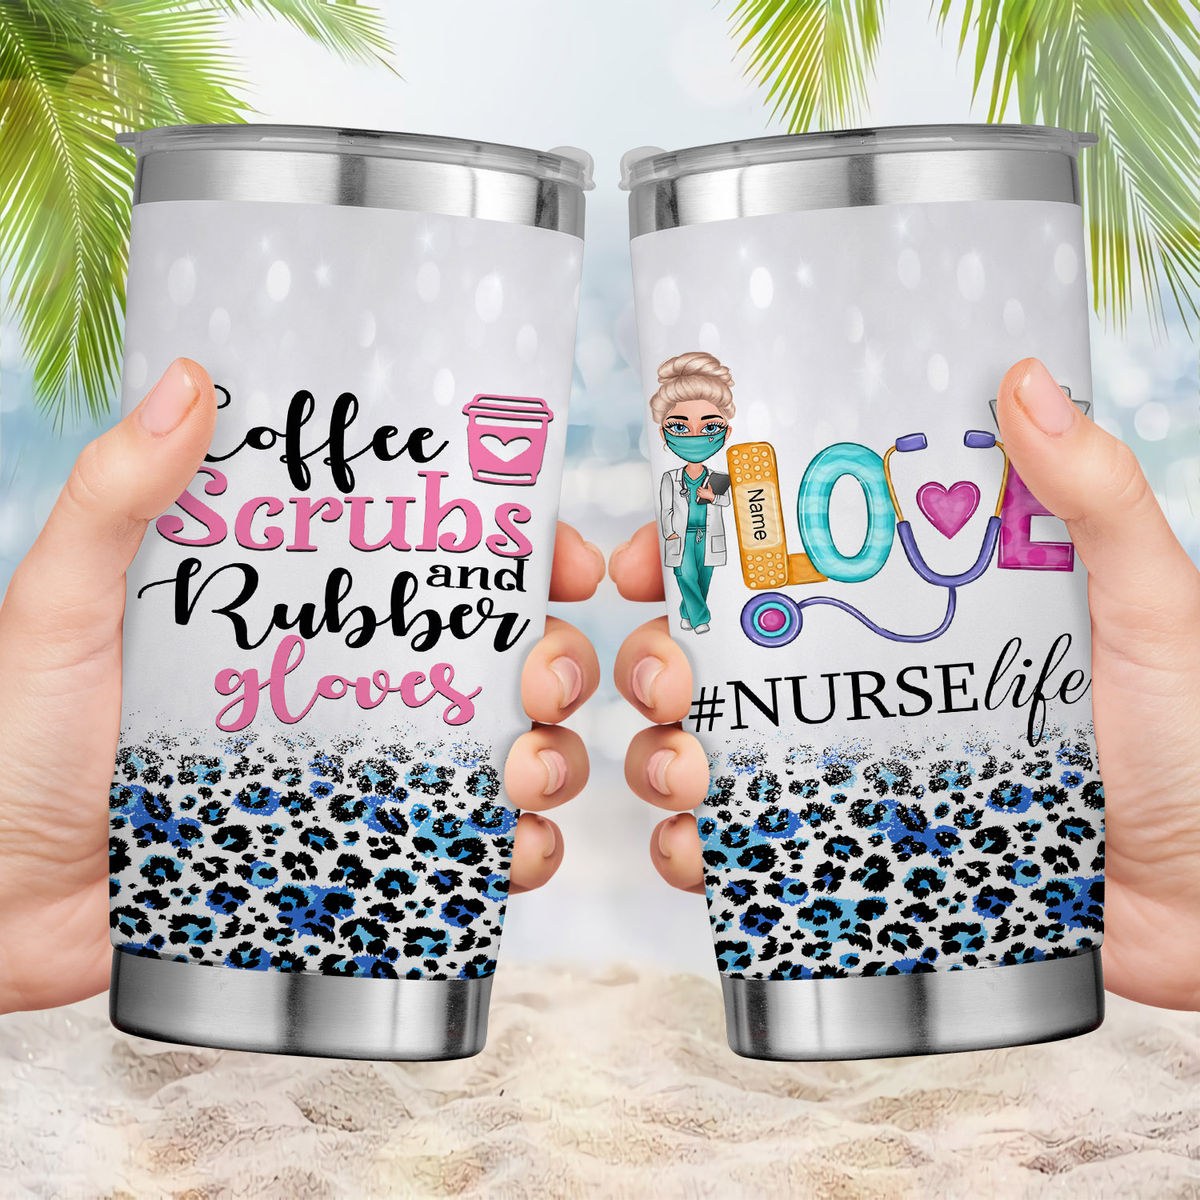 Golf Tumbler Cups - Golf Tumbler Engraved with an Initial - Love, Georgie